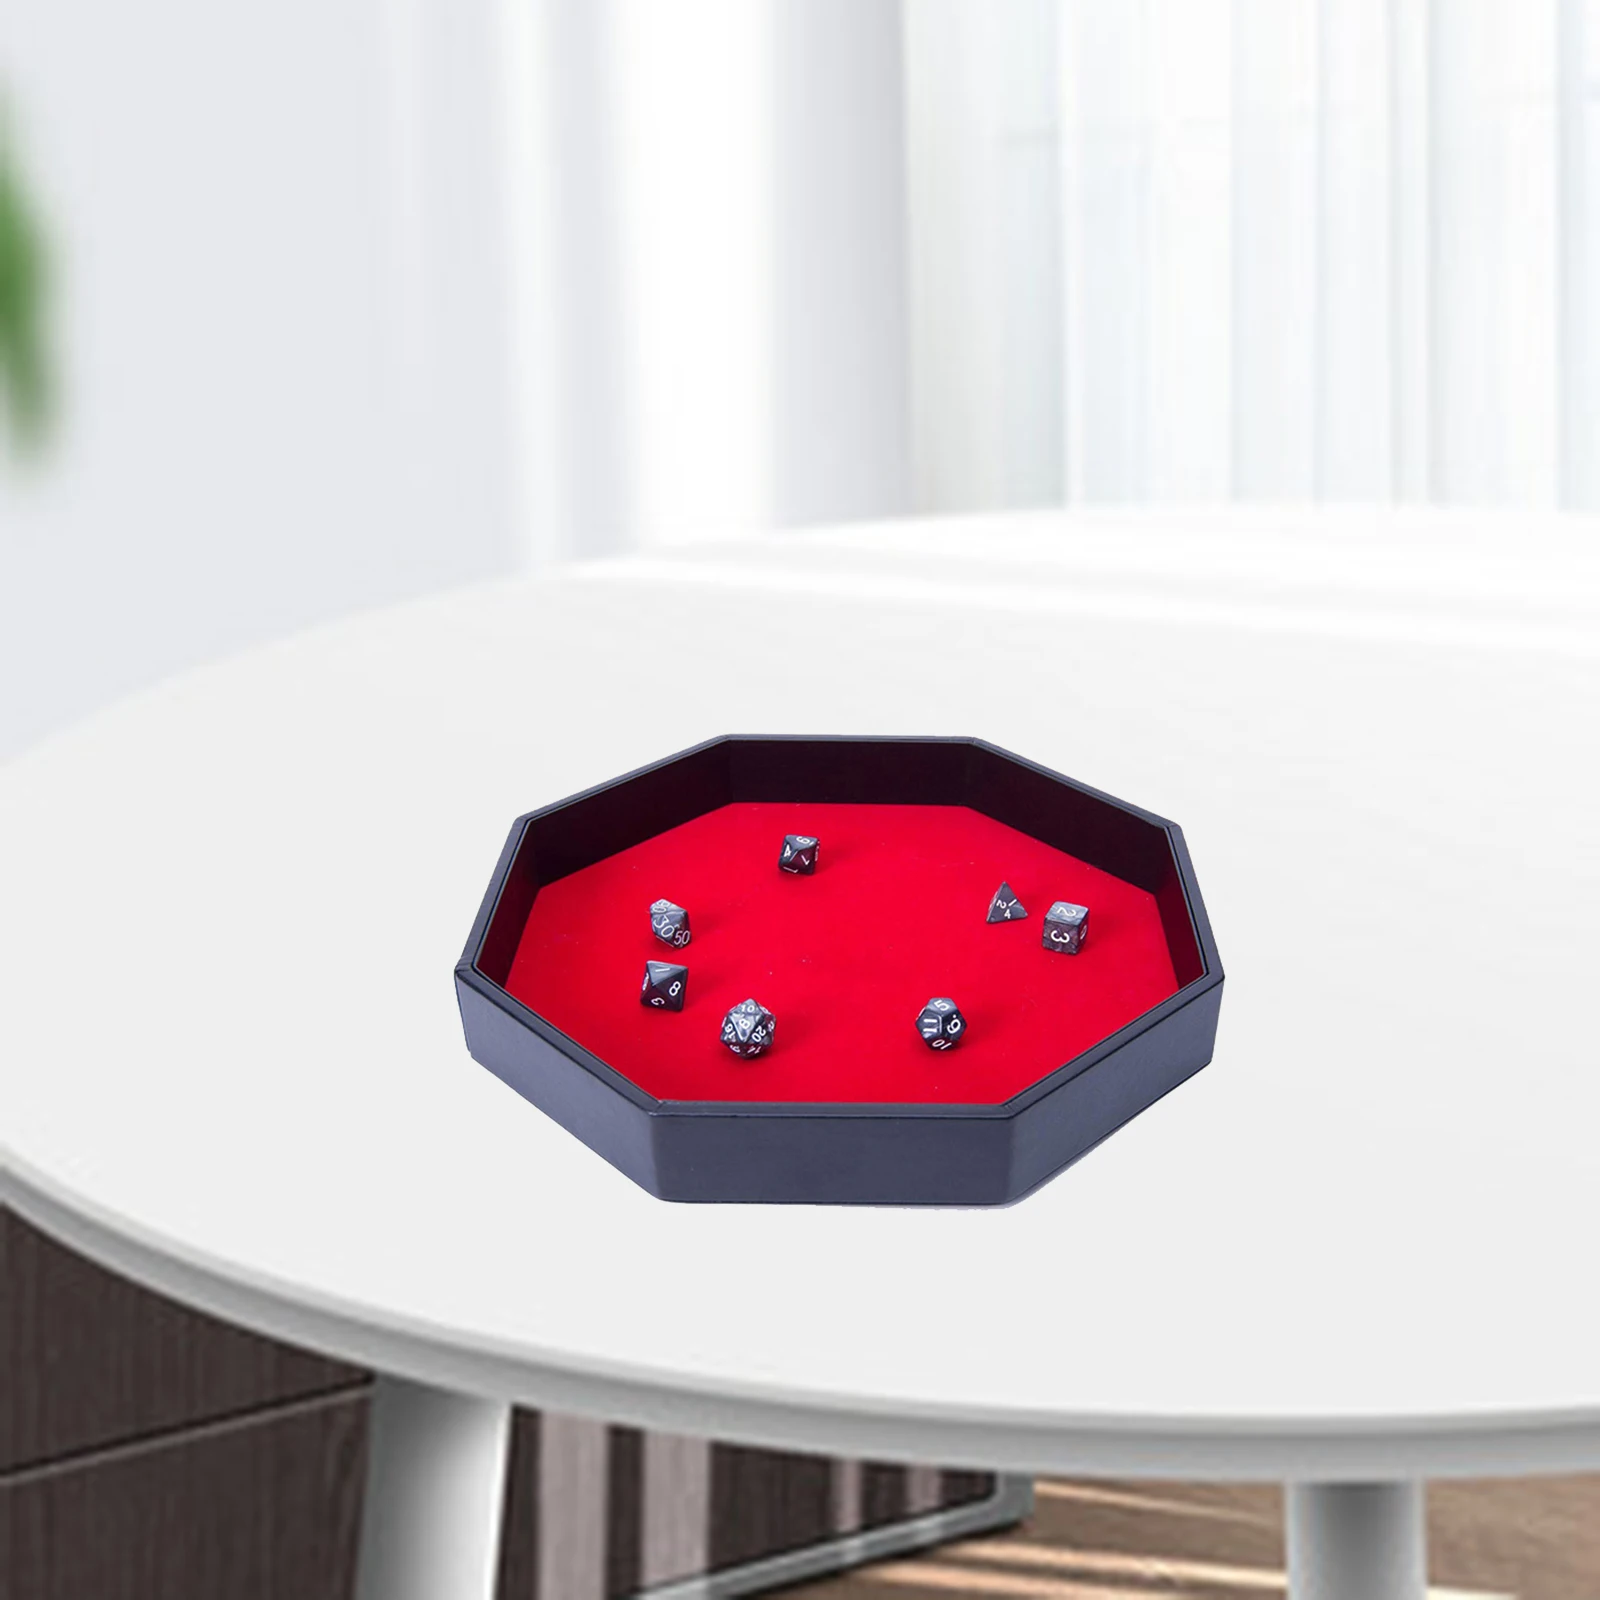 Portable Luxury Octagonal Dice Tray PU Leather Red Velvet Rolling Mat Table Games RPG and DND Family Game Night Dice Game